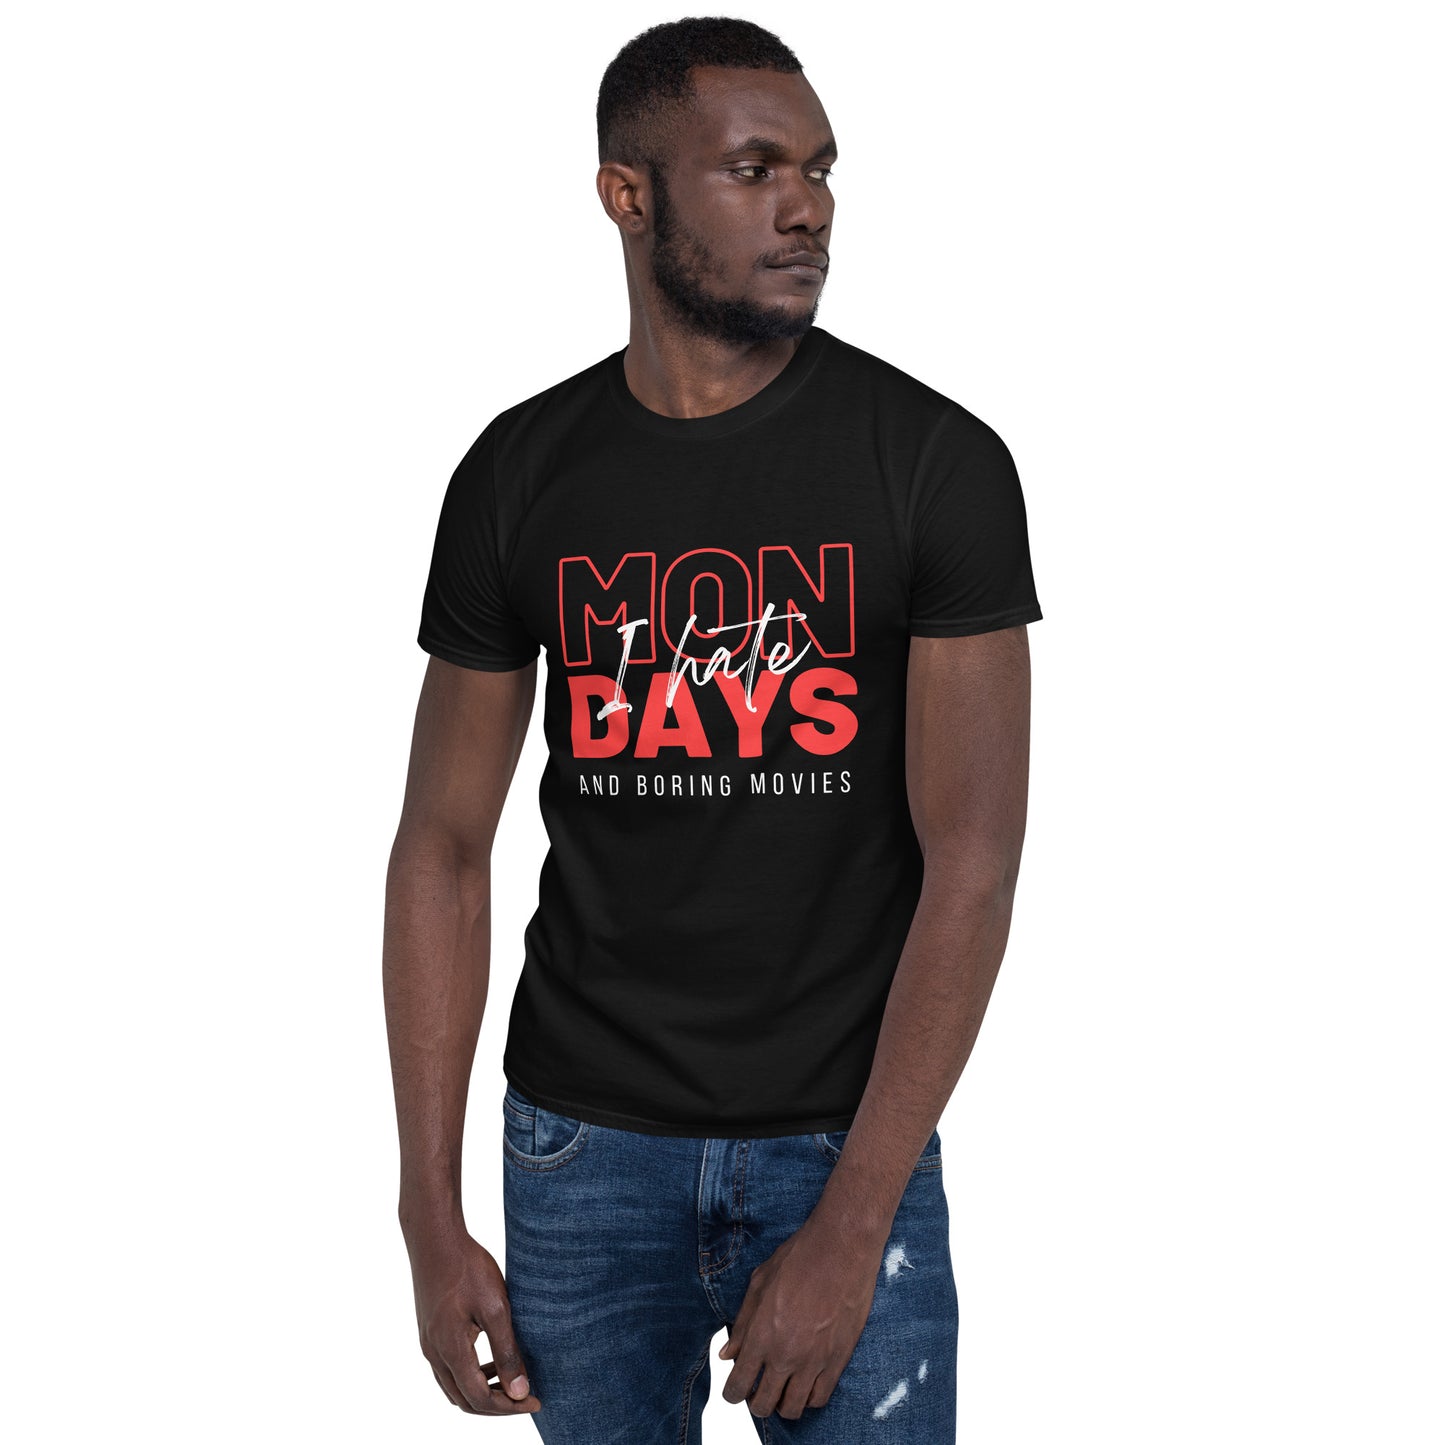 I Hate Mondays and Boring Movies Short-Sleeve Unisex T-Shirt, Gift for Movie Lovers